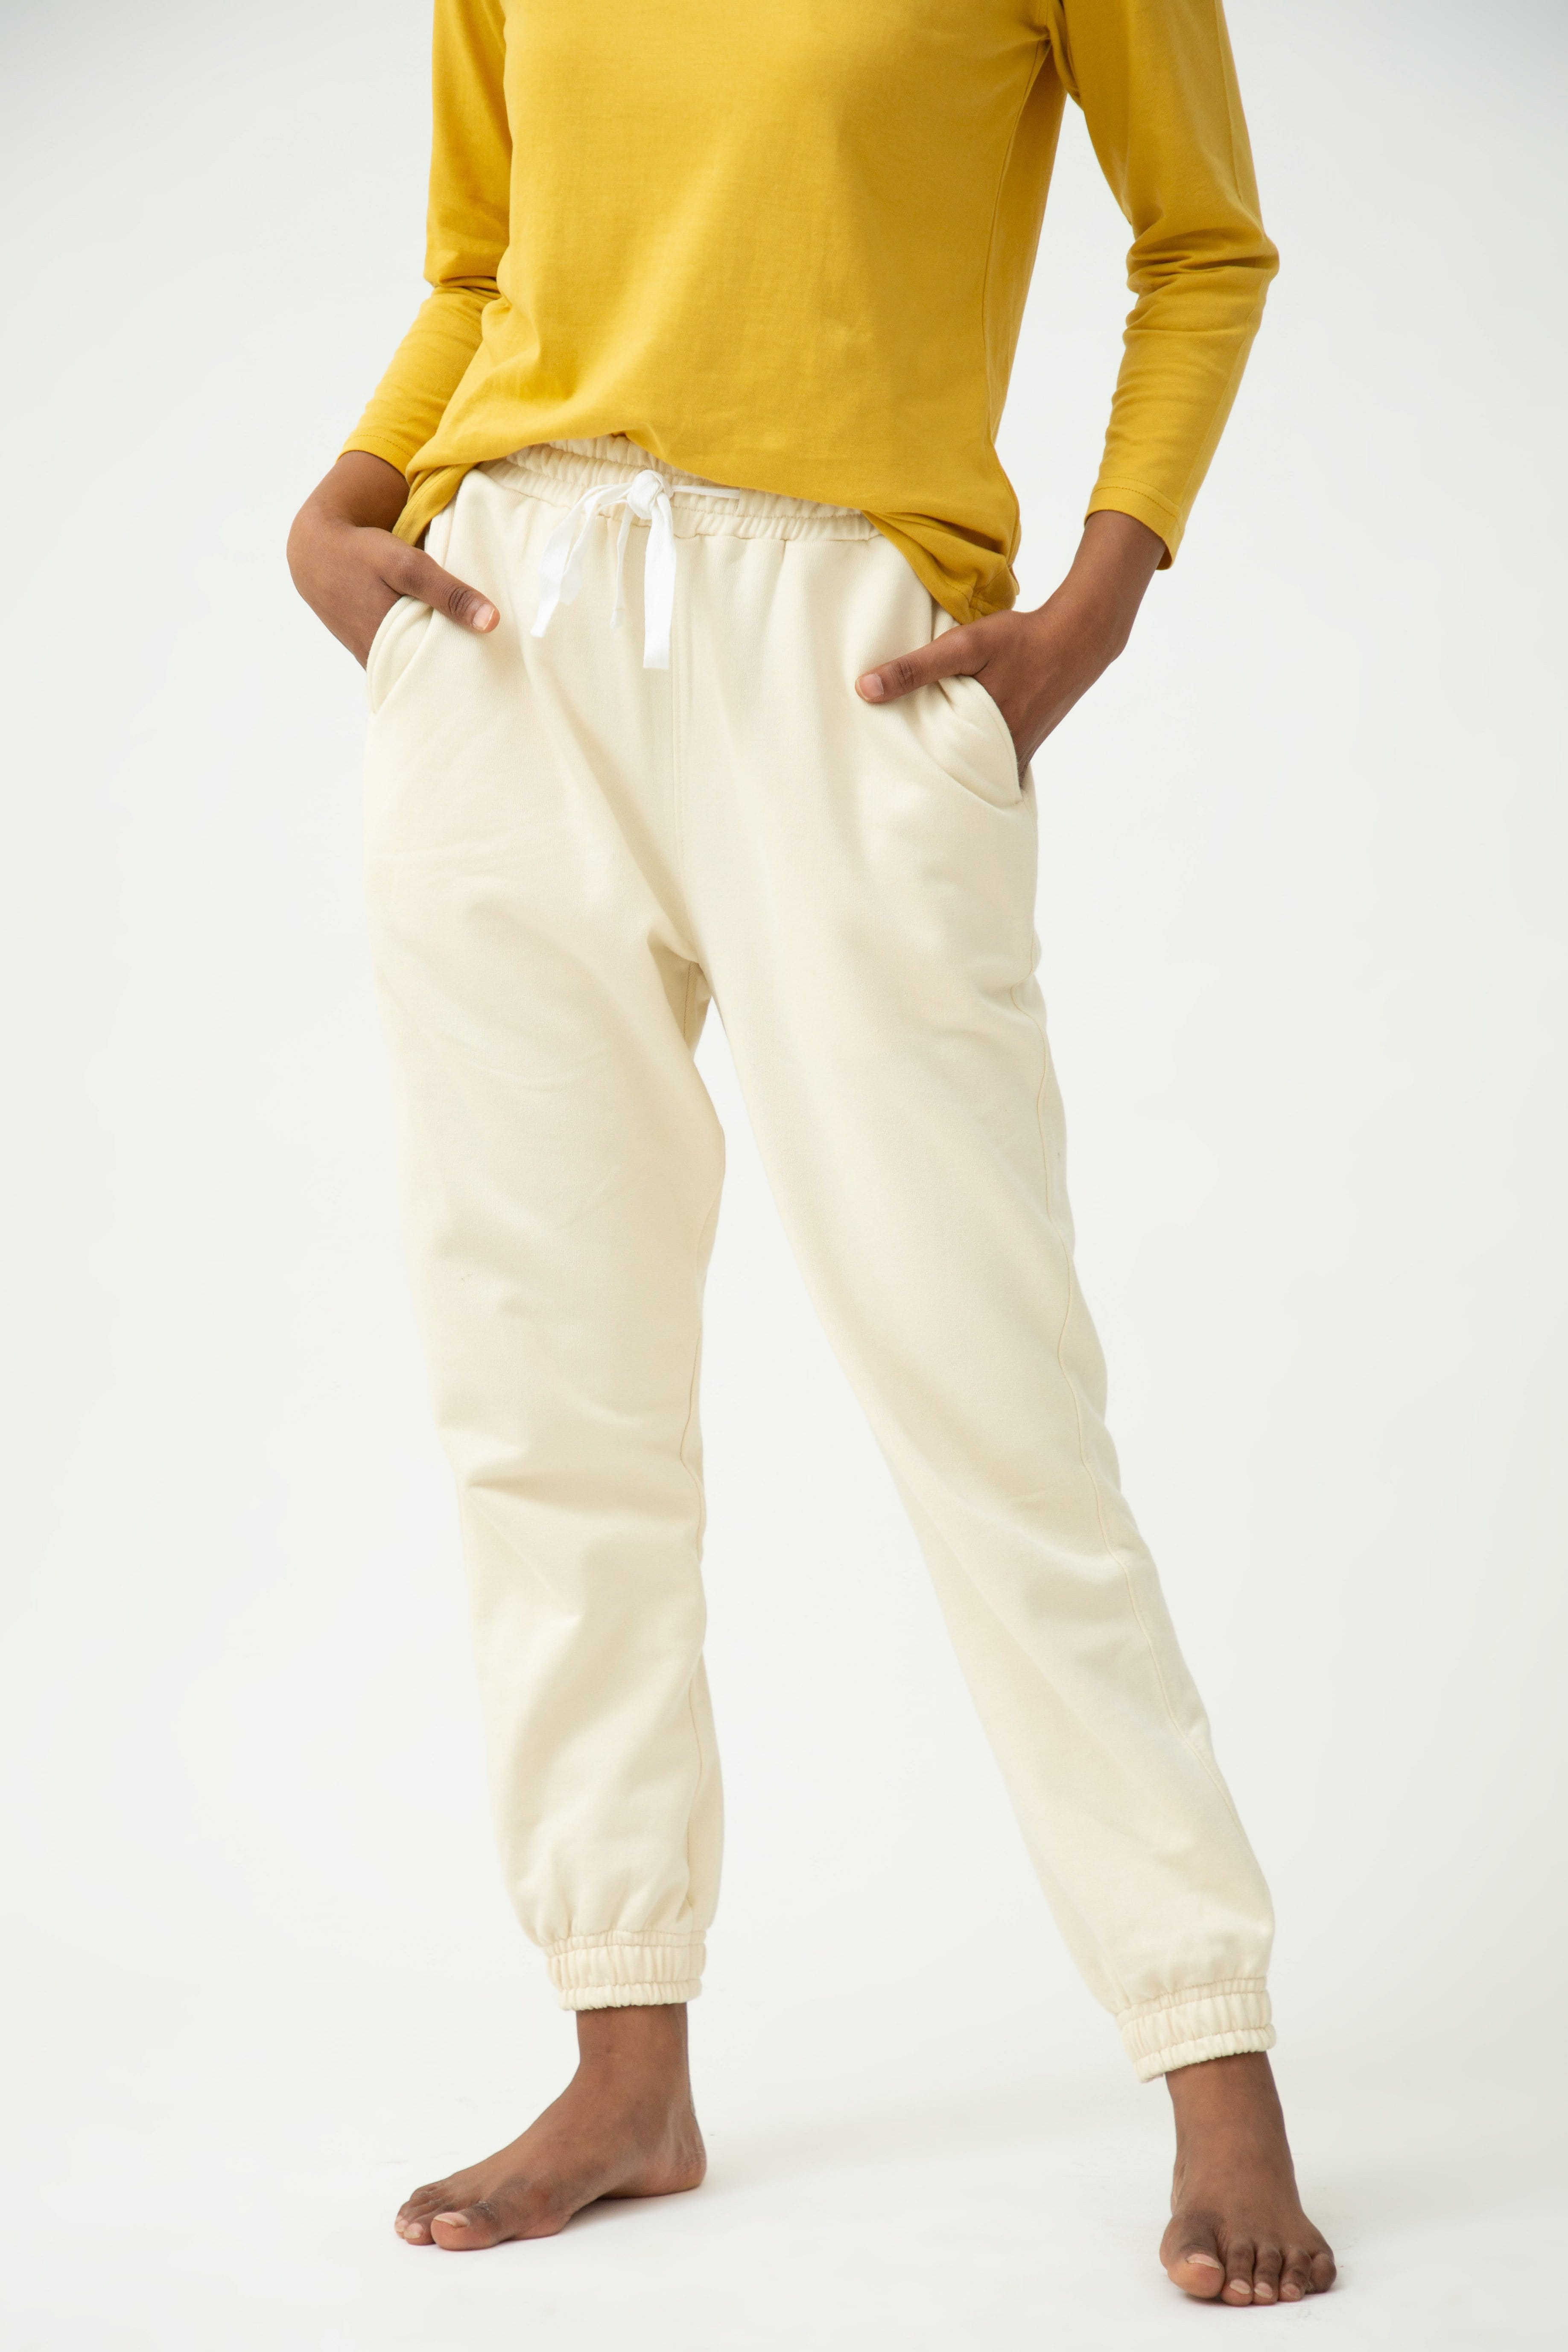 Saltpetre womens wear, lounge wear for casual wear.
 Comfortable joggers with elasticated ankle and side pockets in off white colour. Made from 100% organic cotton.